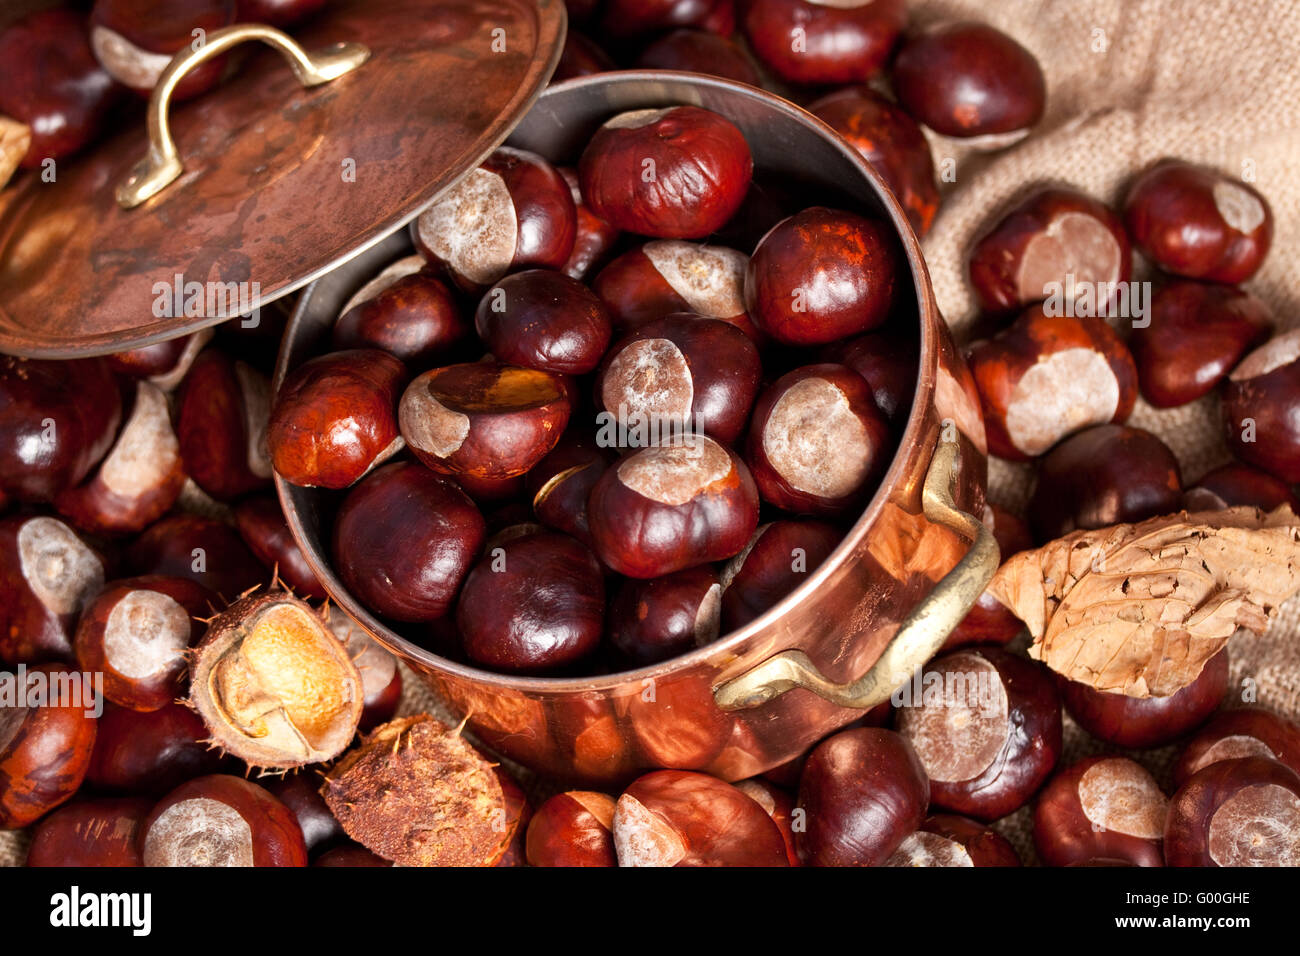 Chestnuts and copper kettle, autumn concept image Stock Photo